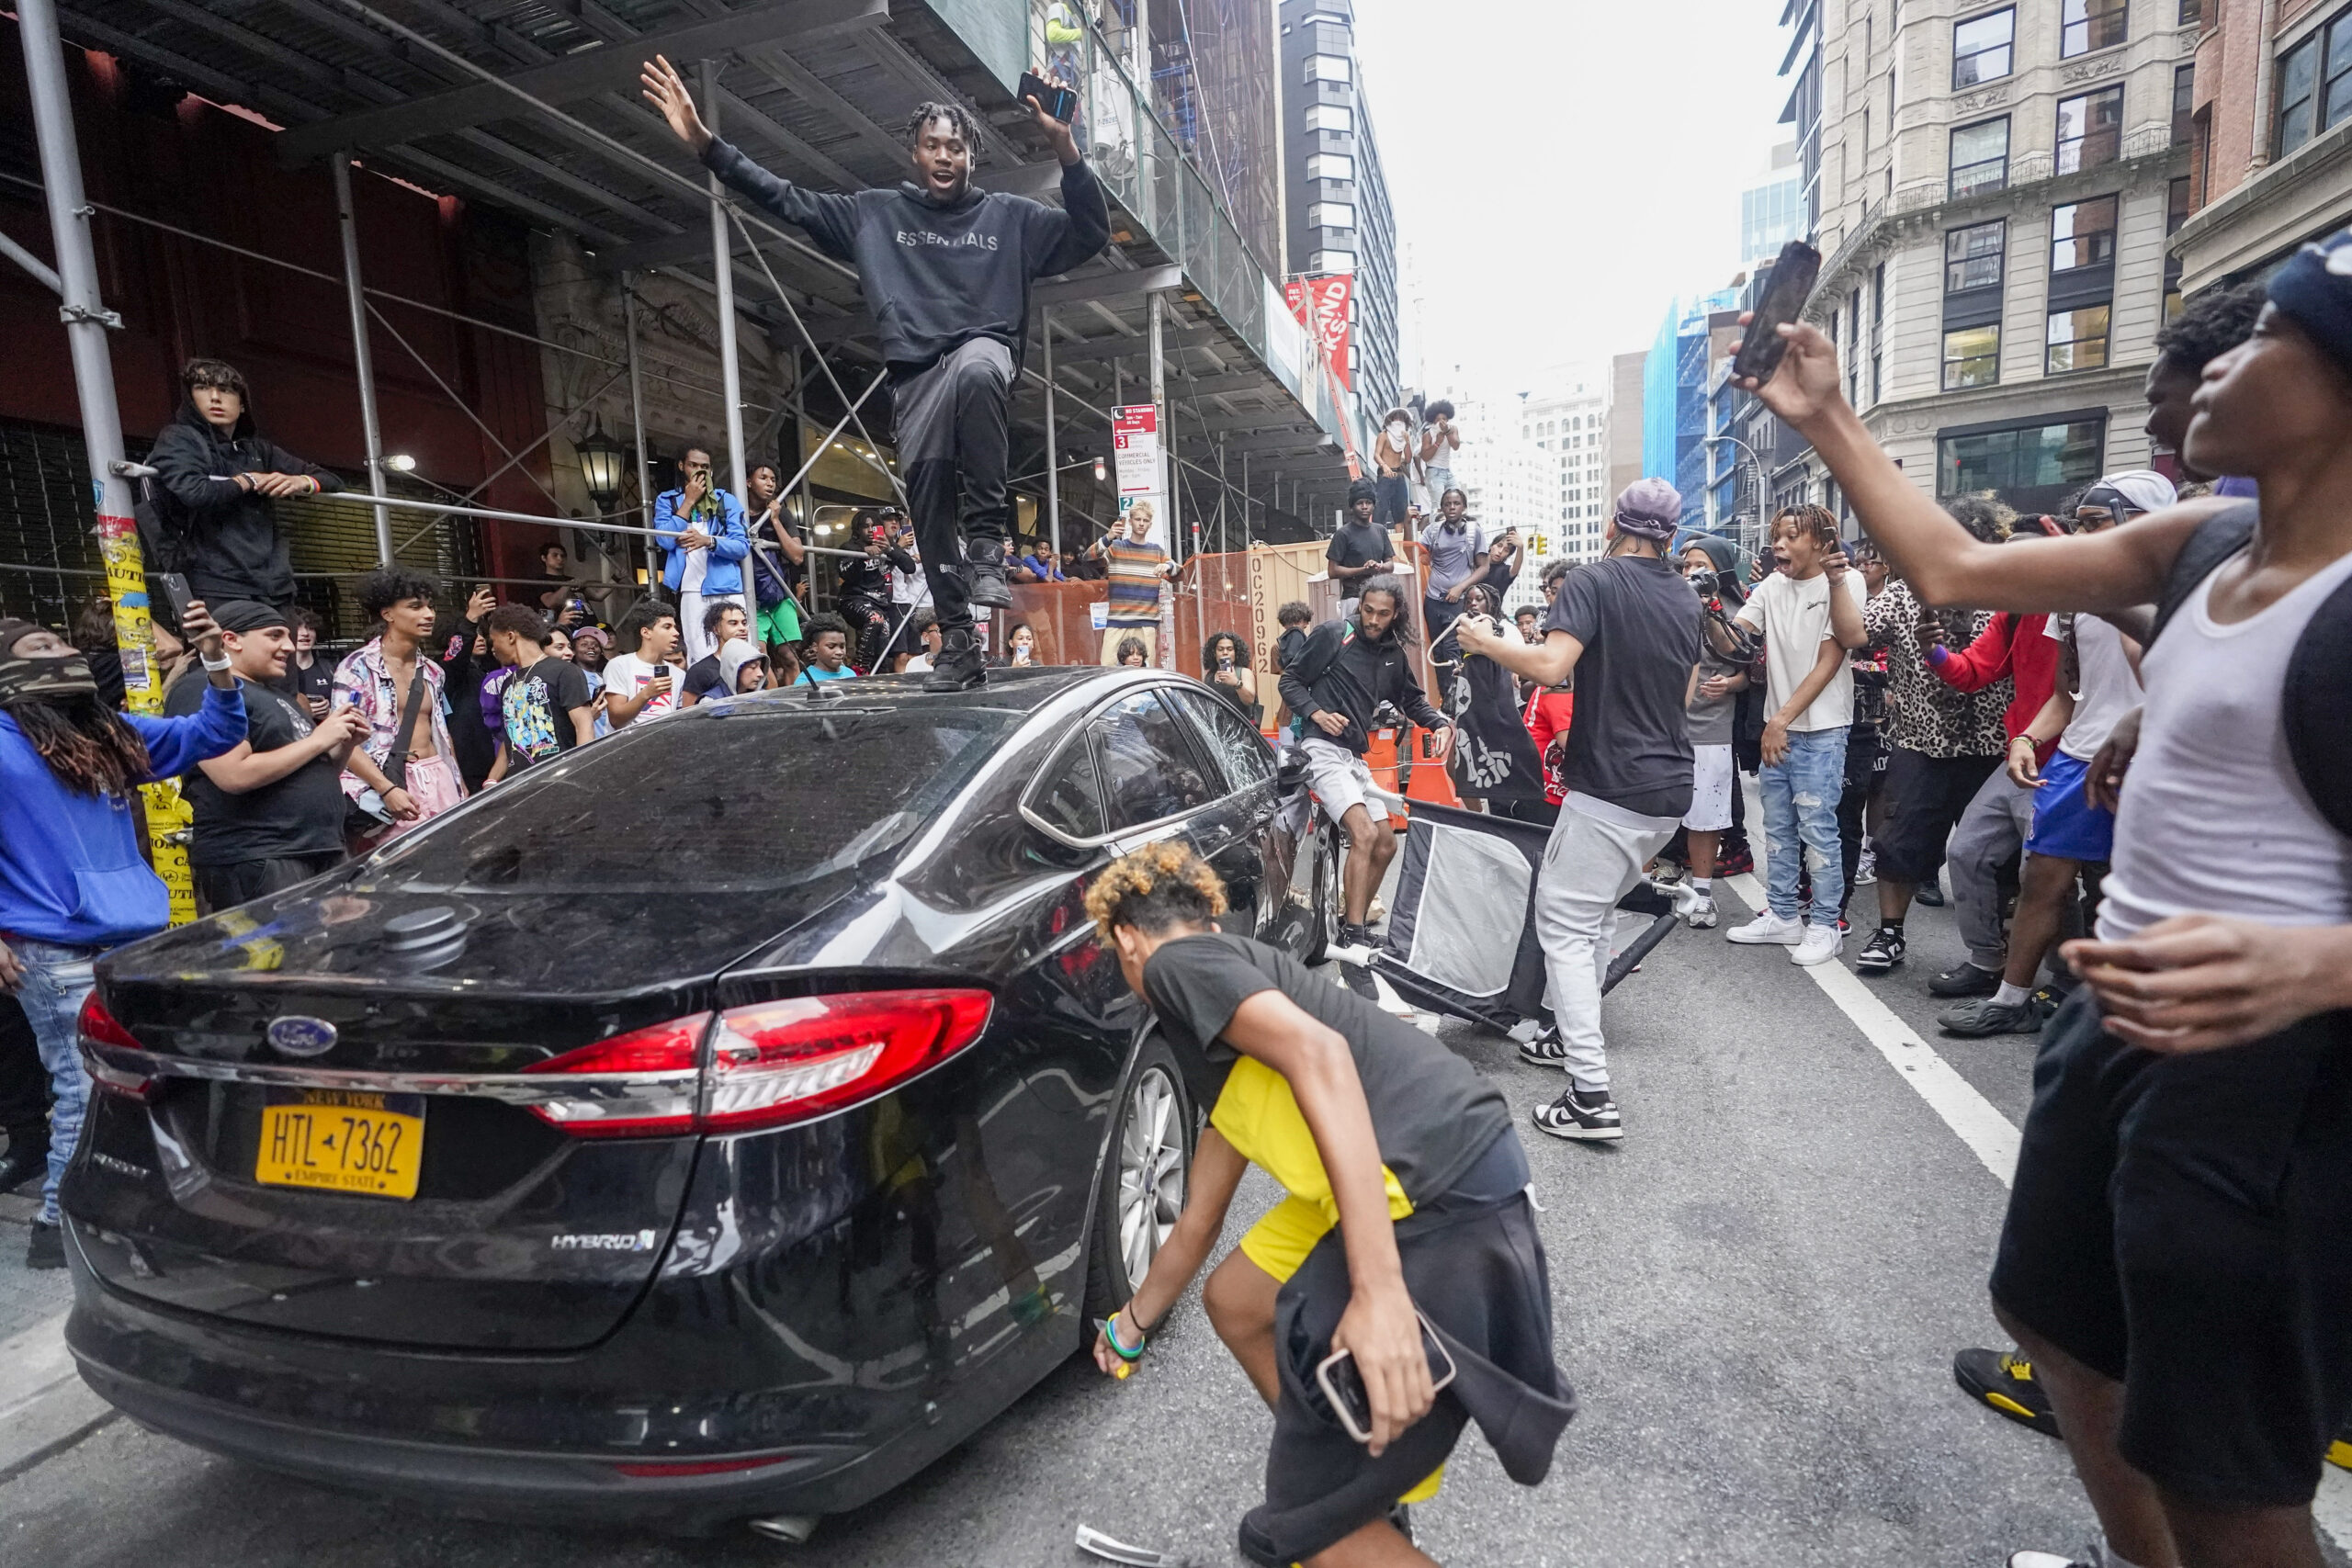 Twitch streamer Kai Cenat invited fans to a giveaway in New York City's Union Square, leading to a riot and a clash between teenagers and police officers.